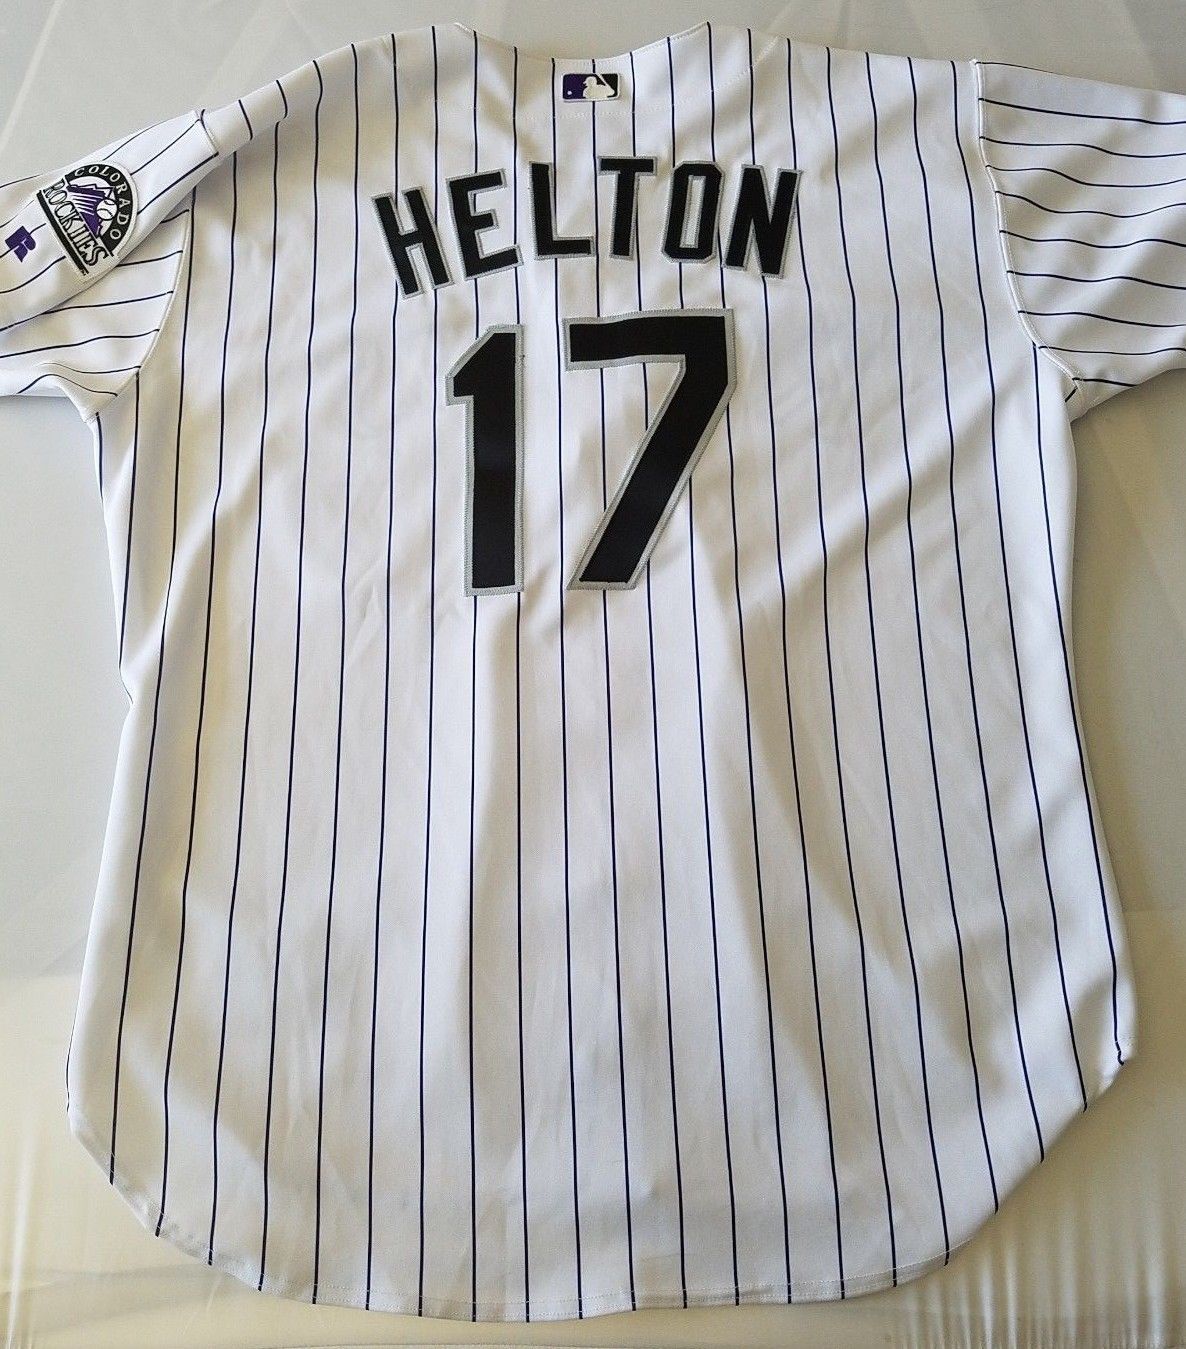 Todd Helton game worn '03-'04 Rockies road jersey, Miedema authenticated